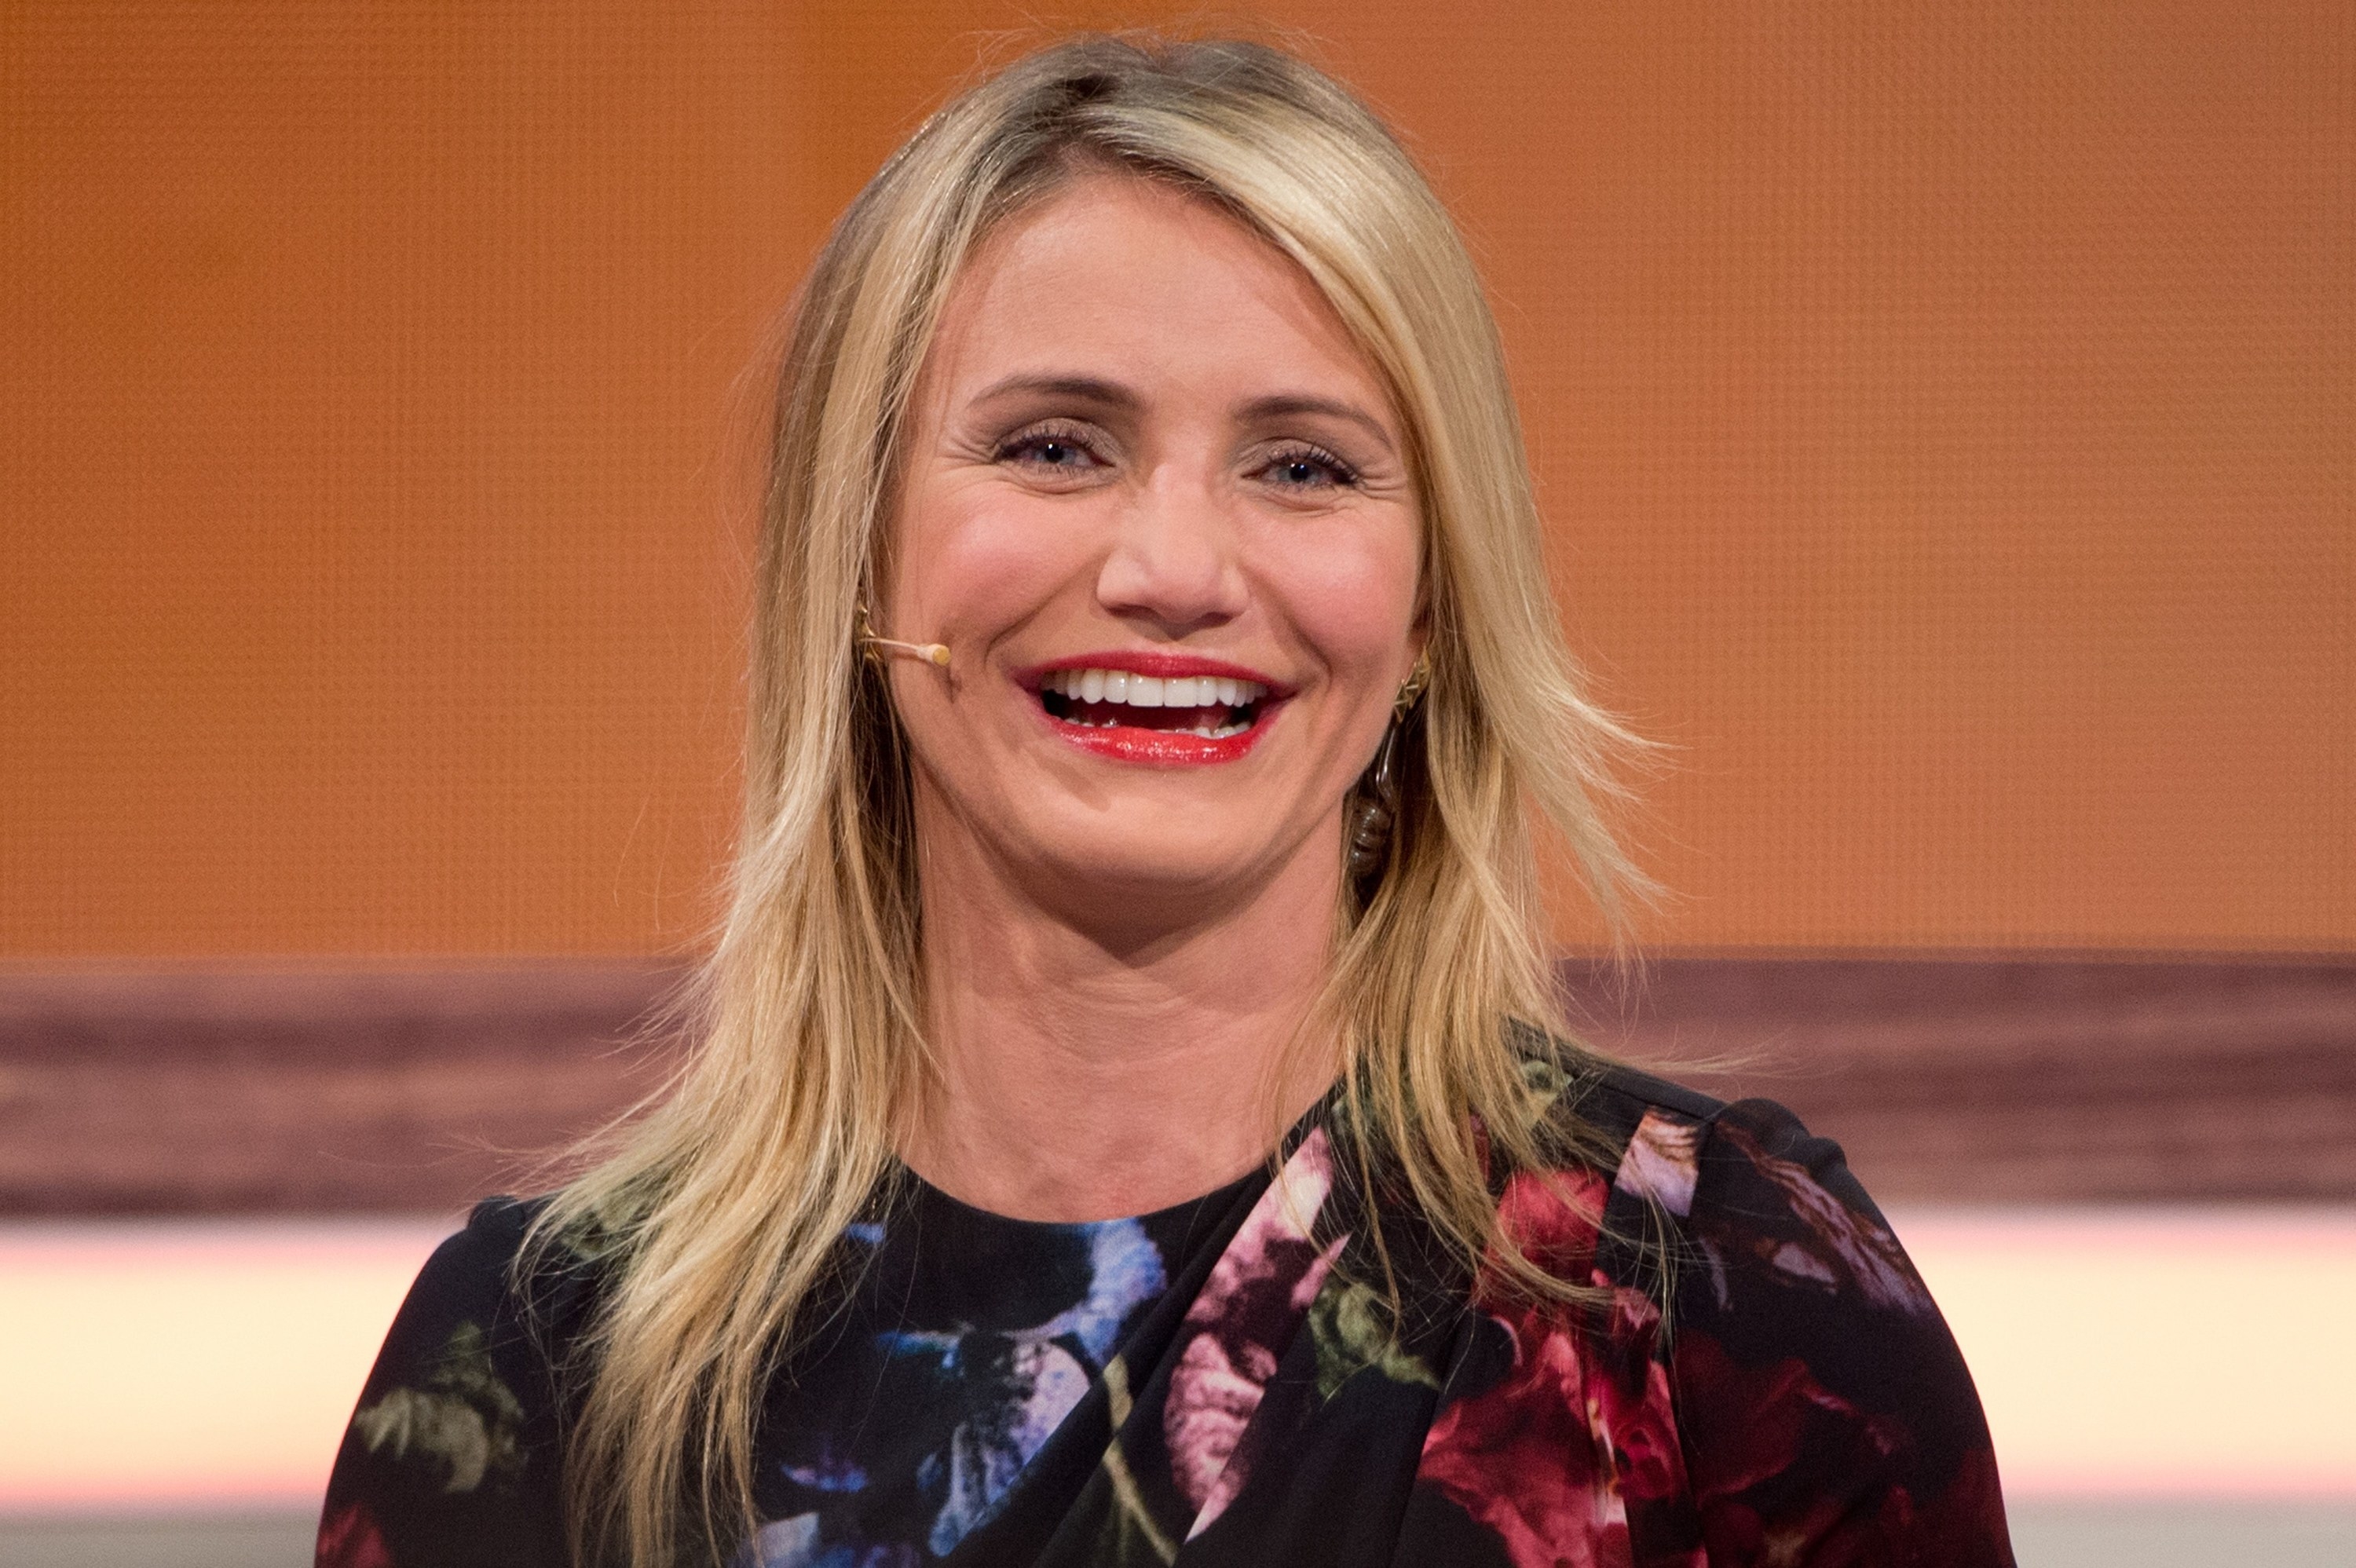 Cameron Diaz laughing with a head mic attached to her